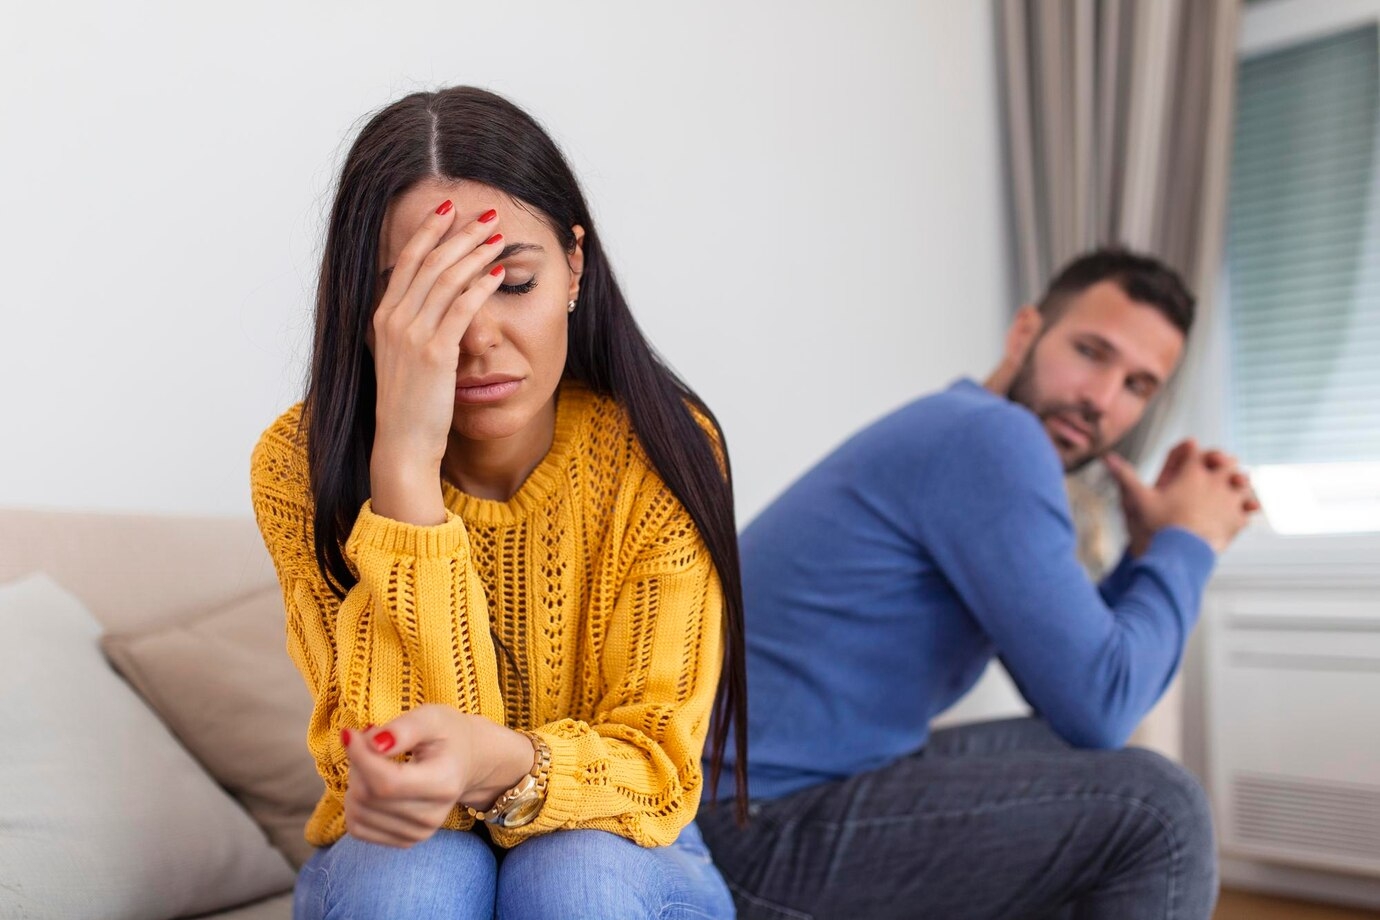 The most common reasons for divorce